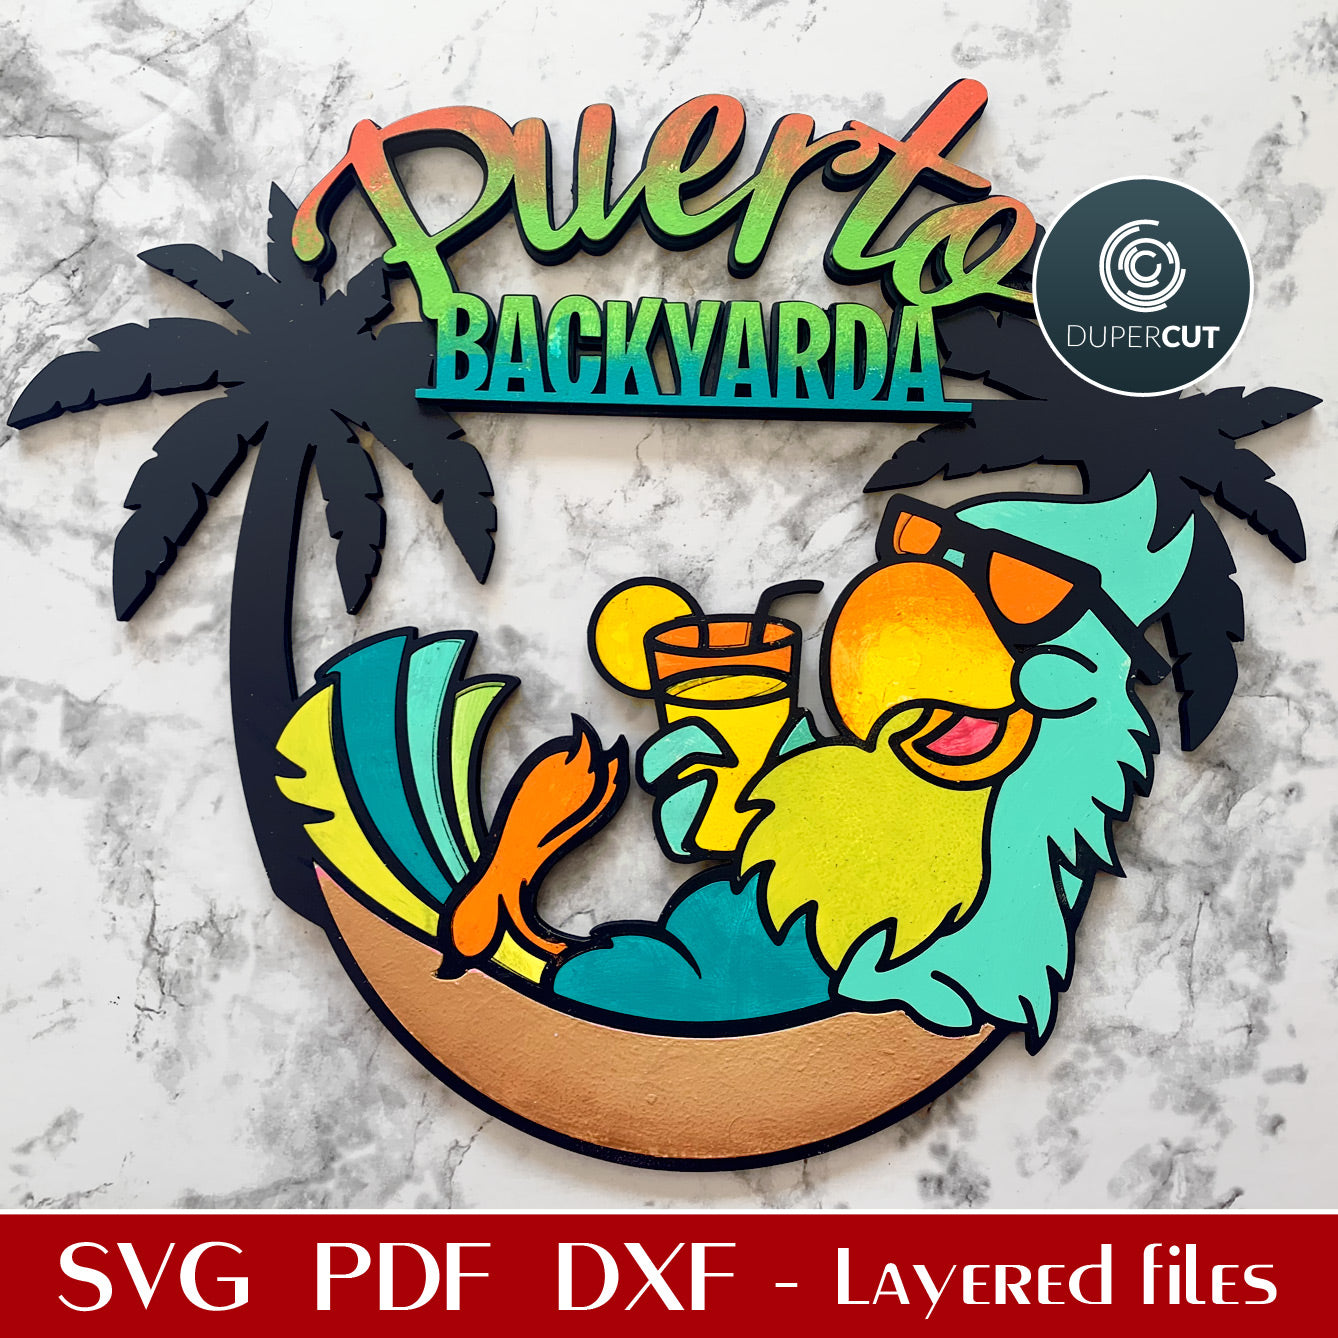 Funny beach welcome sign PUERTO BACKYARDA - parrot in hammock with a drink - SVG DXF vector layered laser cutting files for Glowforge, Cricut, Silhouette, CNC plasma machines by www.DuperCut.com